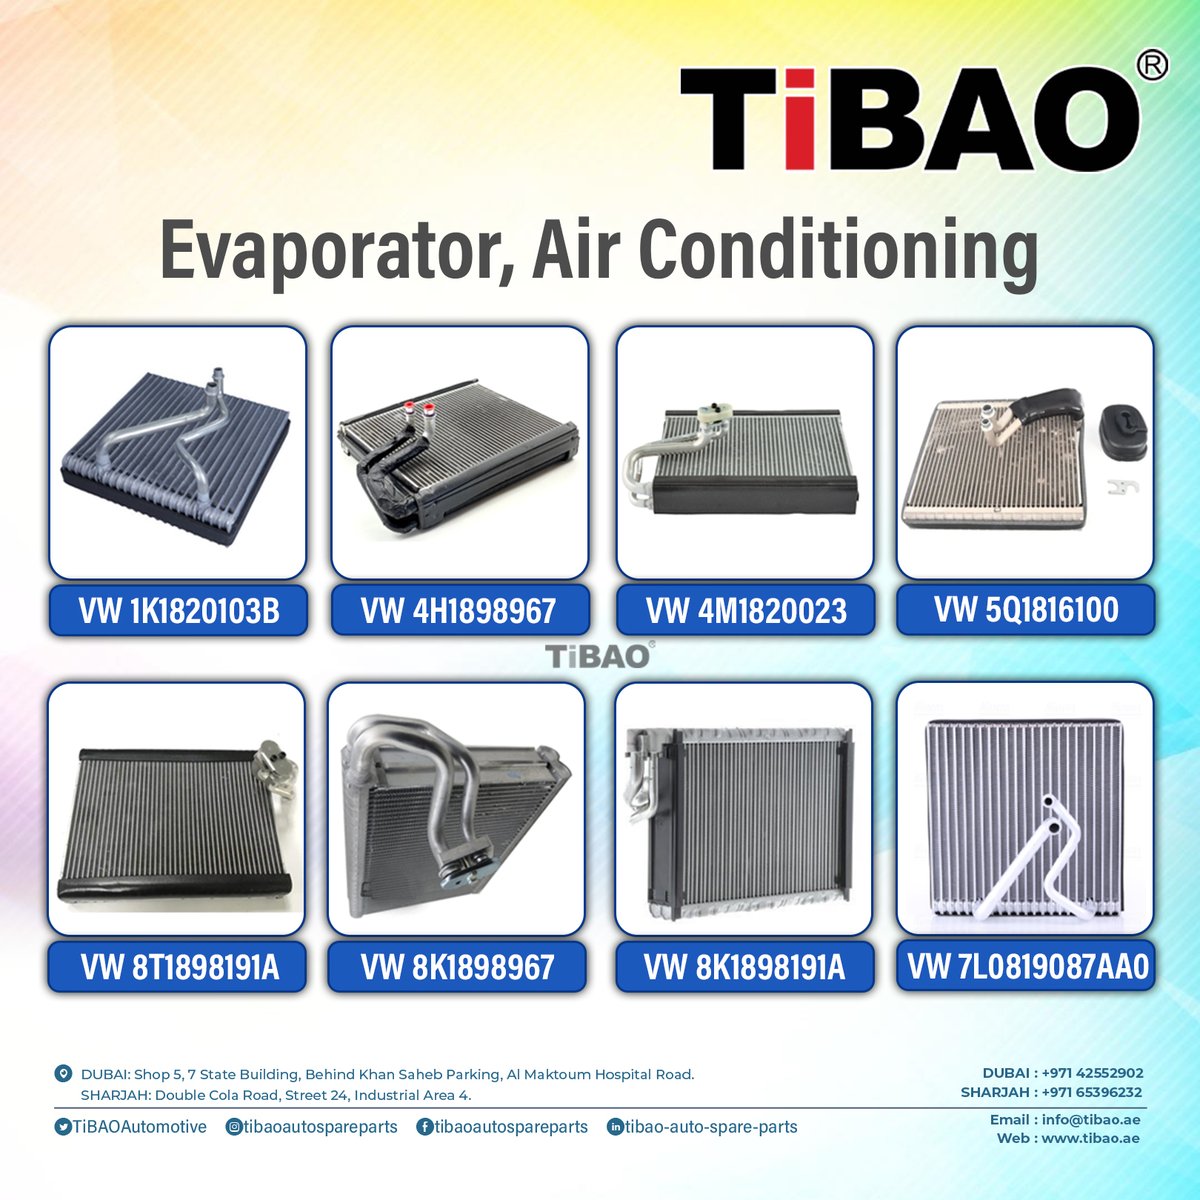 🚗🔧 Stay cool this season with Tibao Auto Spare Parts! Check out our latest offering: Evaporator, Air Conditioning. For inquiries and details, call us now at Phone +971 65396232 | +971 42552902. #AutoParts #CoolingSolution #TibaoAutoParts 🌬️